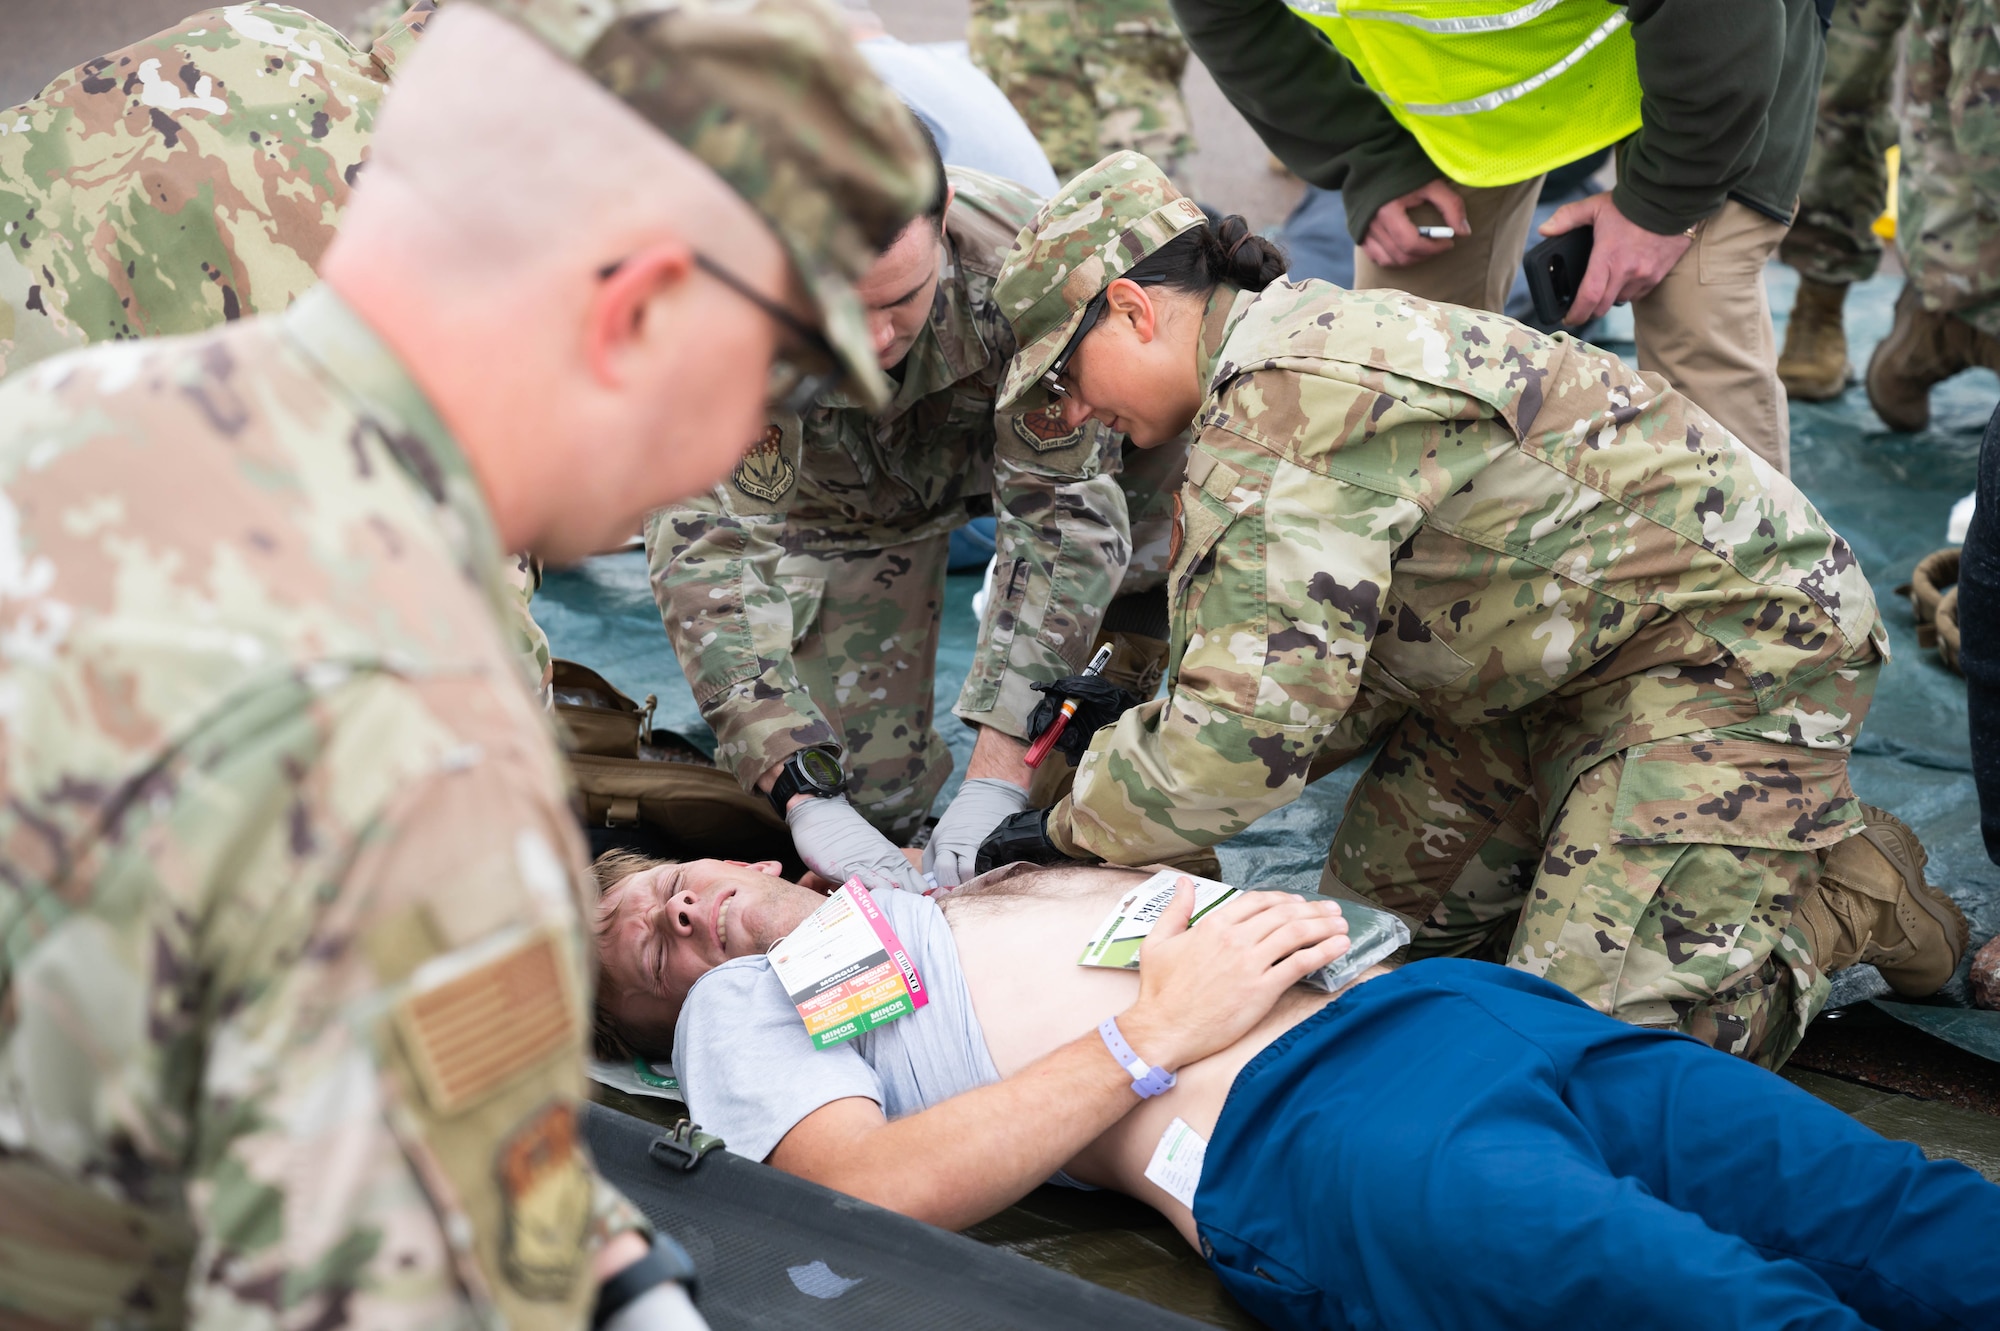 Airman 1st Class Michael Butterfill, center, 341st Civil Engineer Squadron horizontal construction technician, simulates being injured during an exercise Aug. 20, 2021, at Malmstrom Air Force Base, Mont.